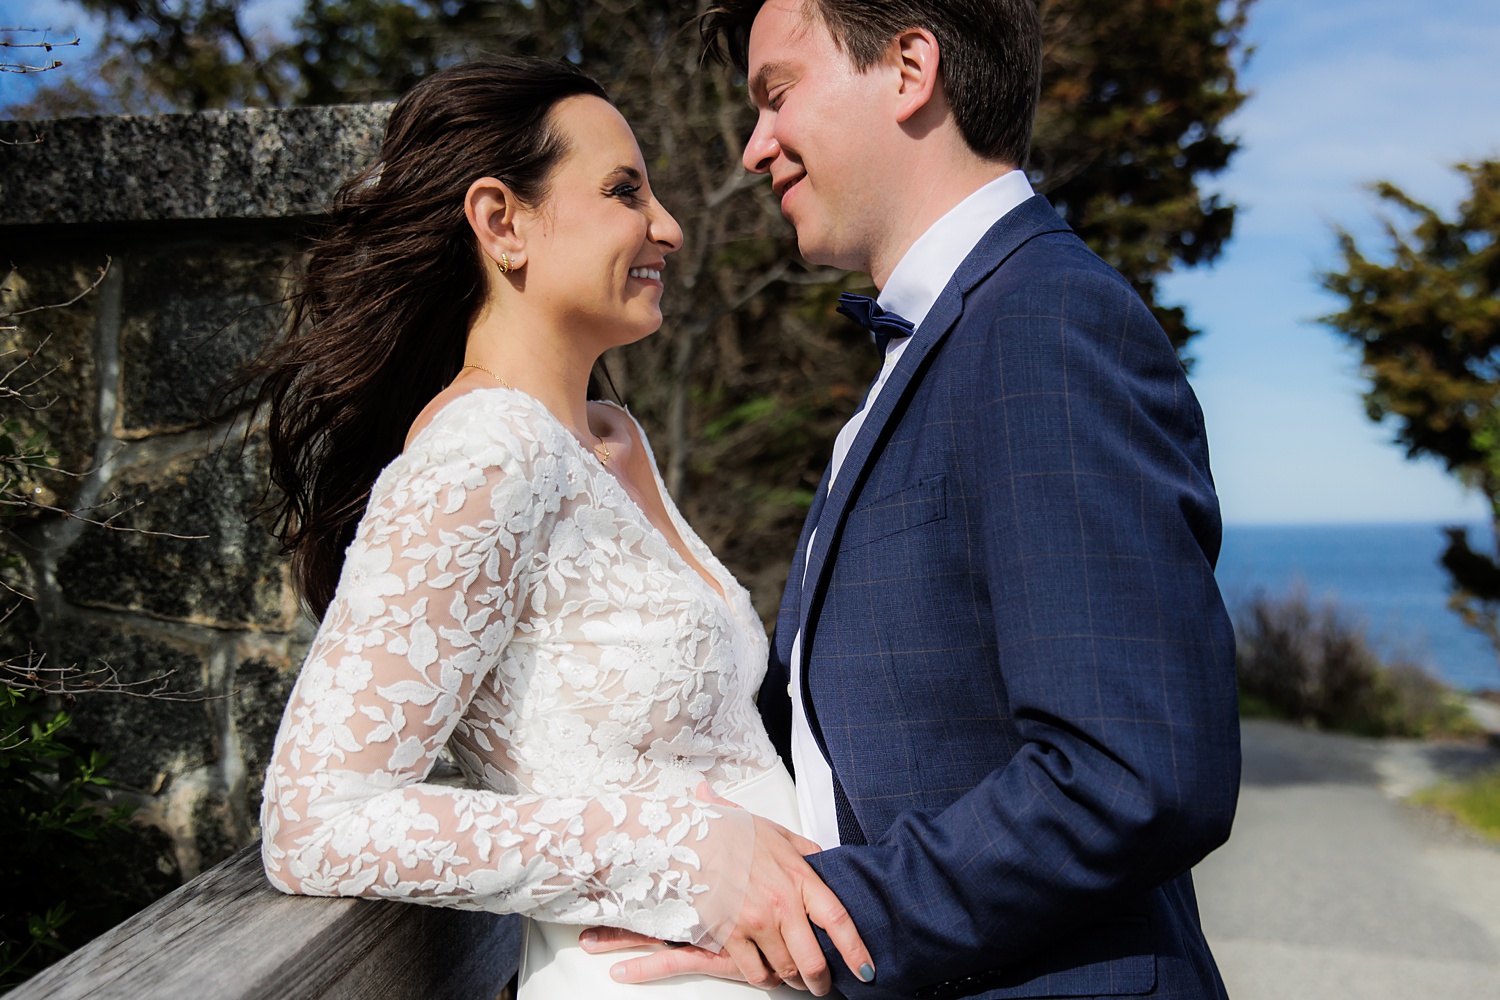 The couple can't stop smiling after a sunny Maine elopement